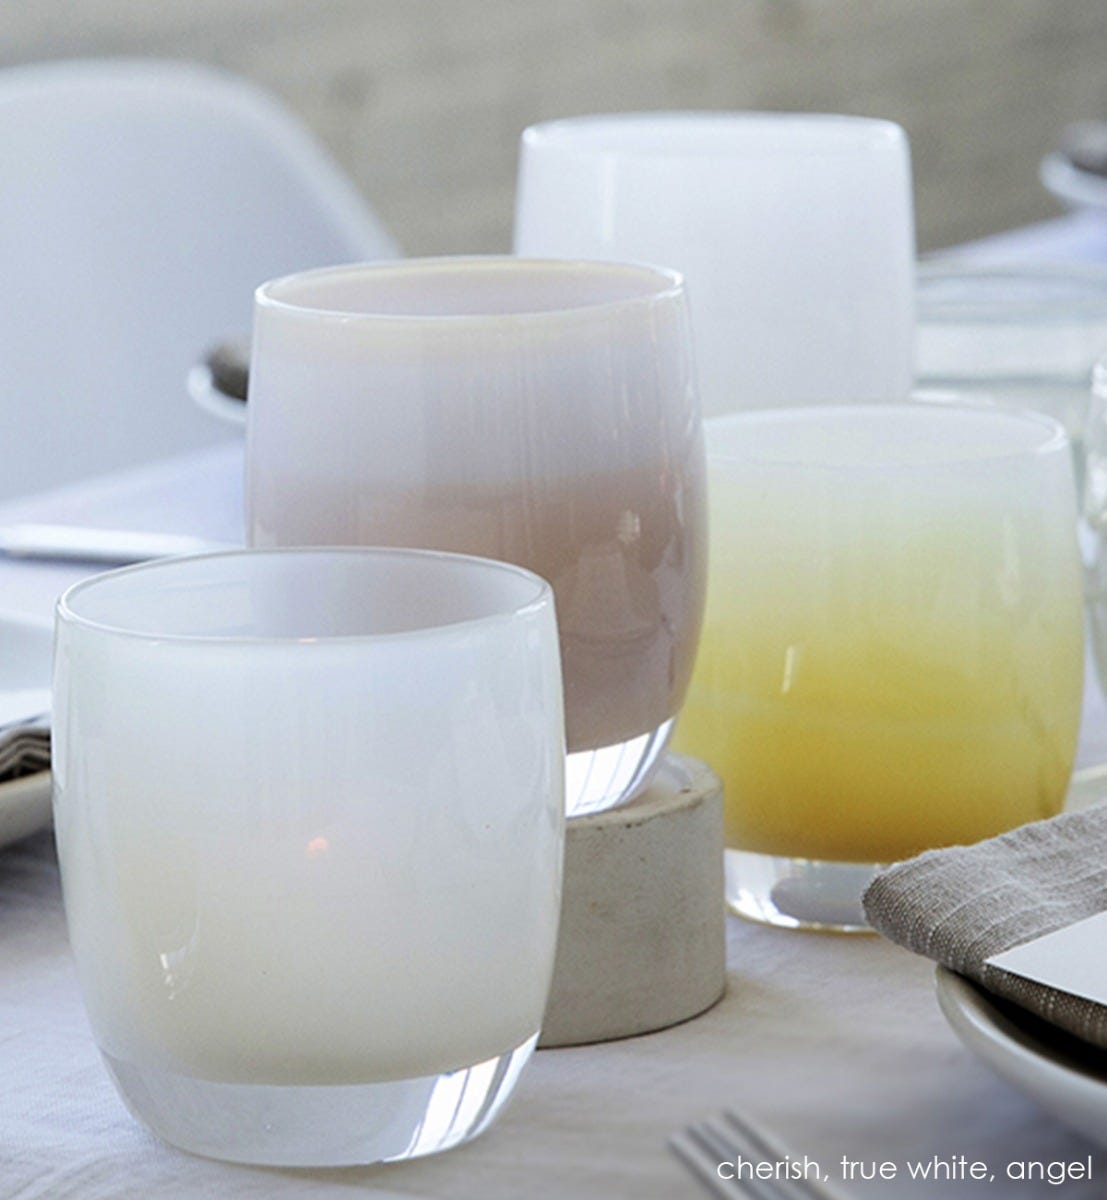 cherish daisy white hand-blown glass votive candle holder. Paired with true white and angel.